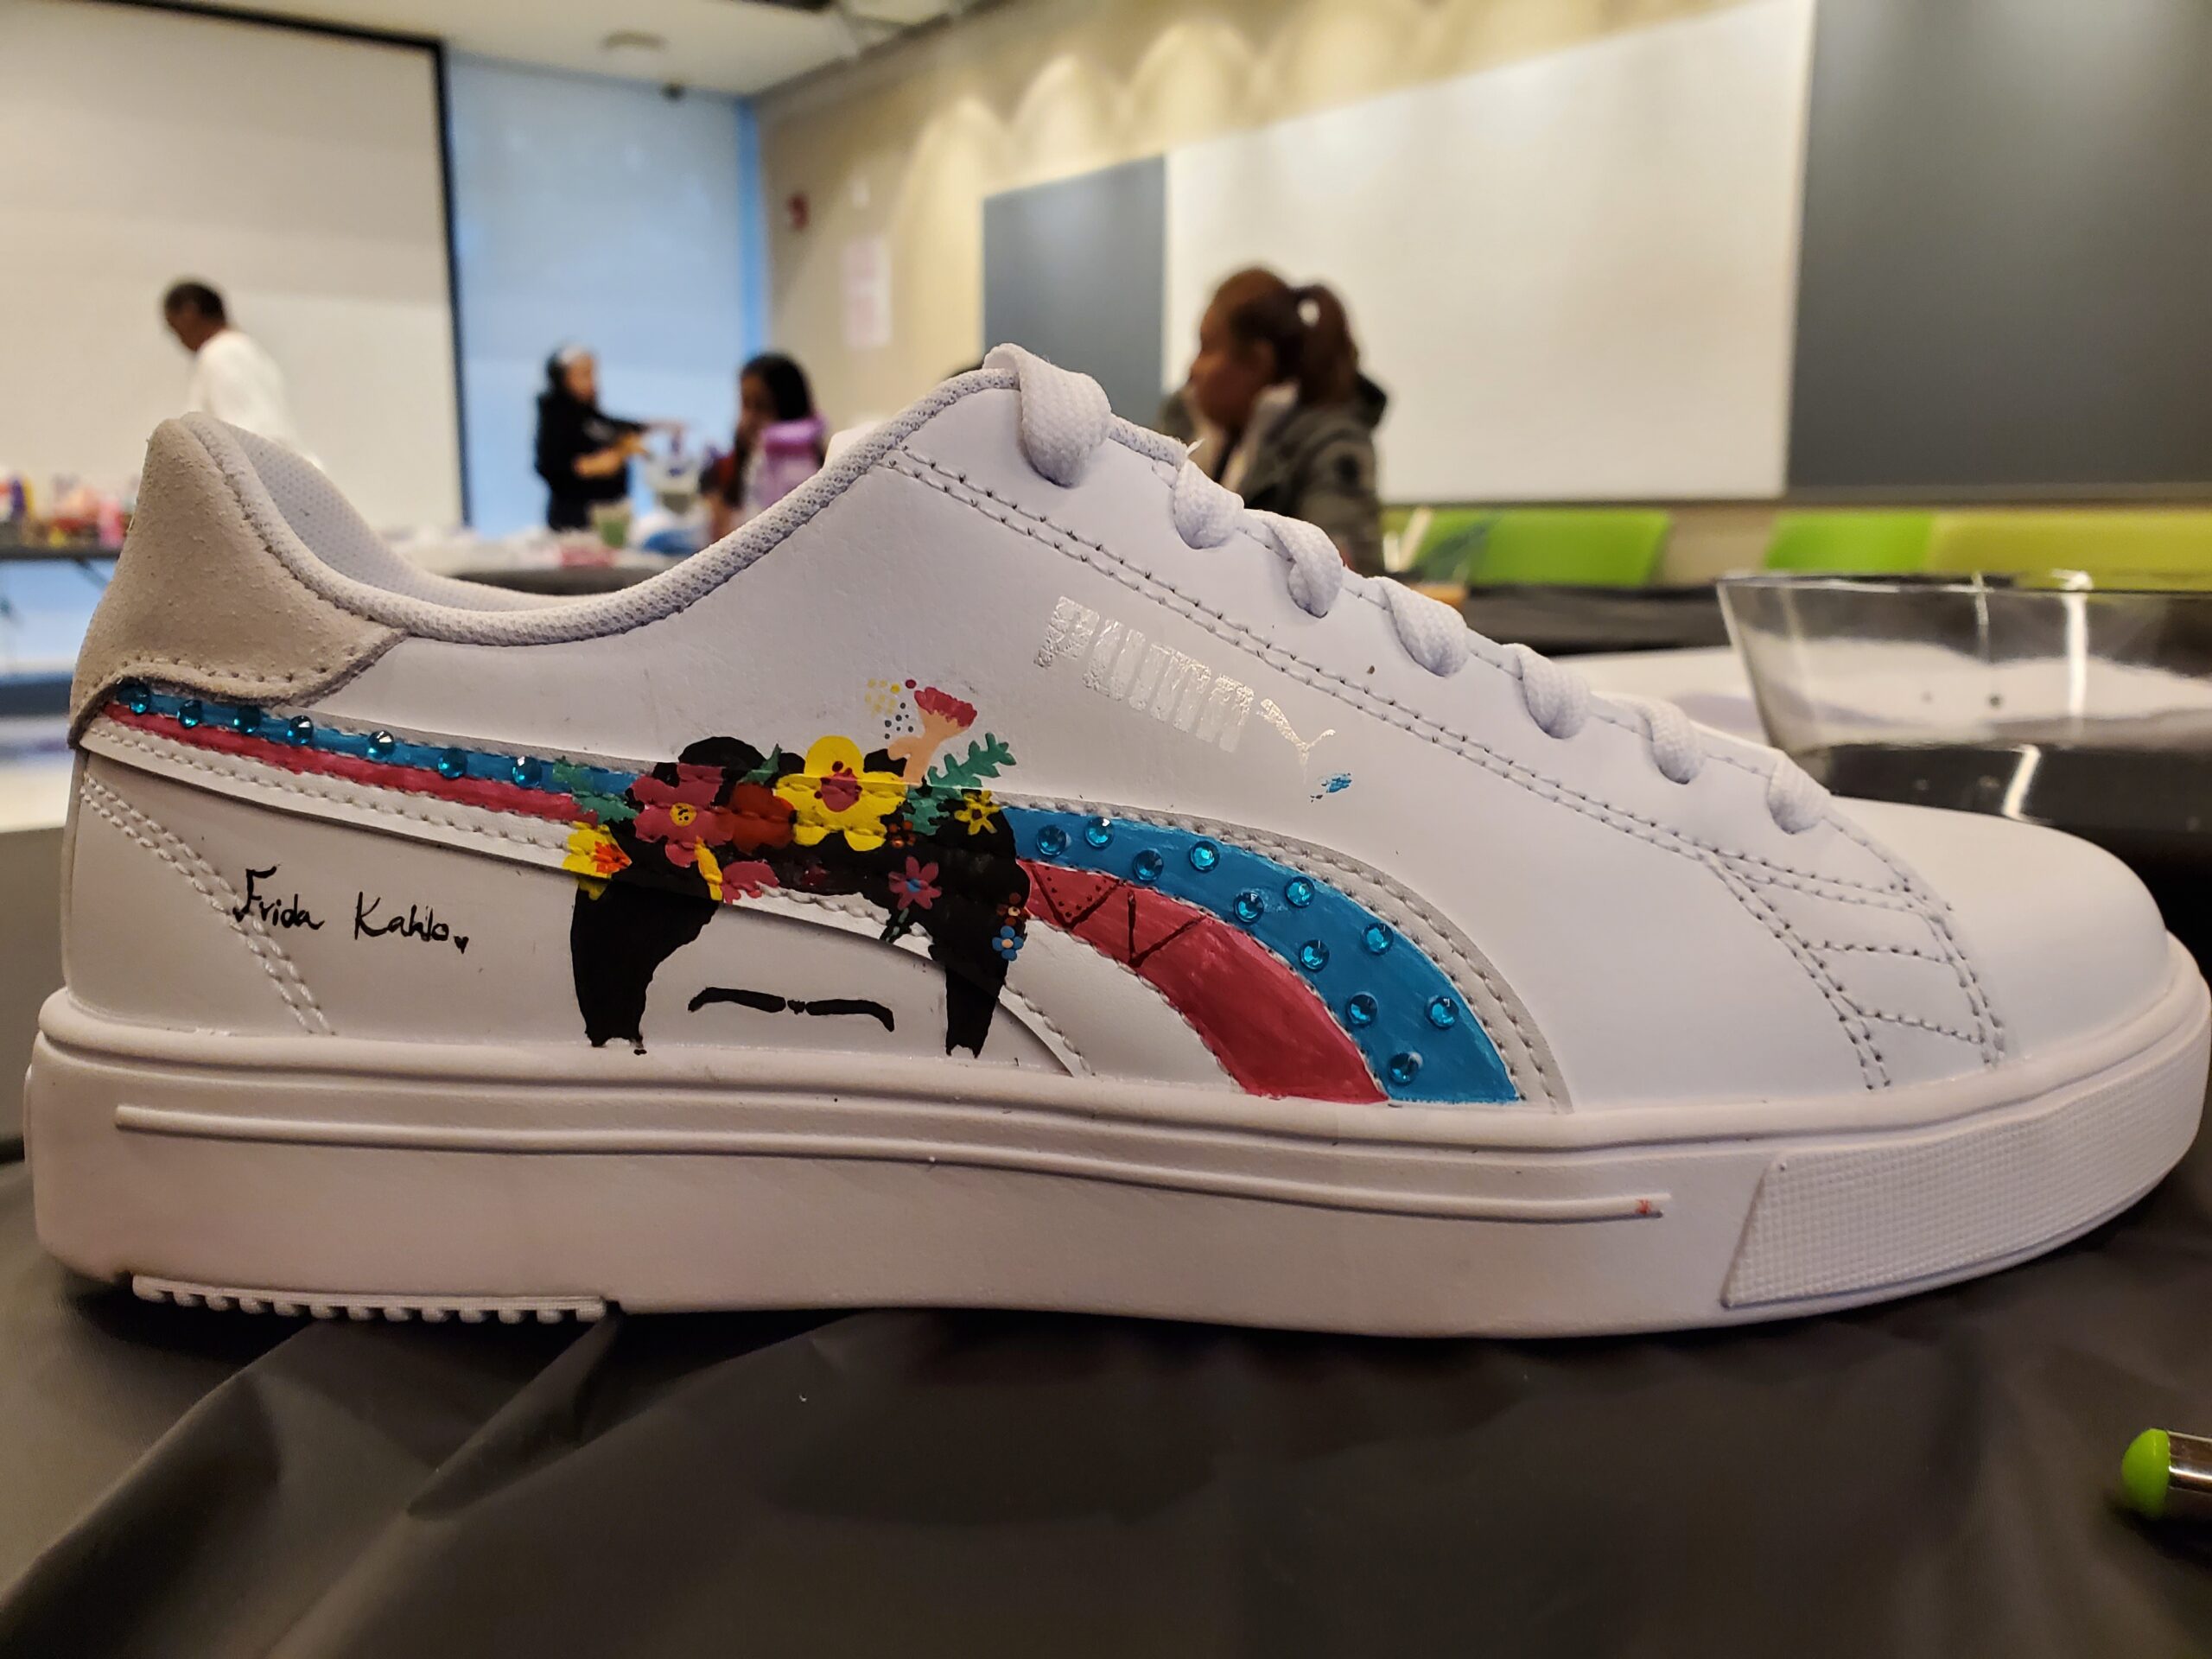 The club helping Black and Latina girls and women design their own sneakers